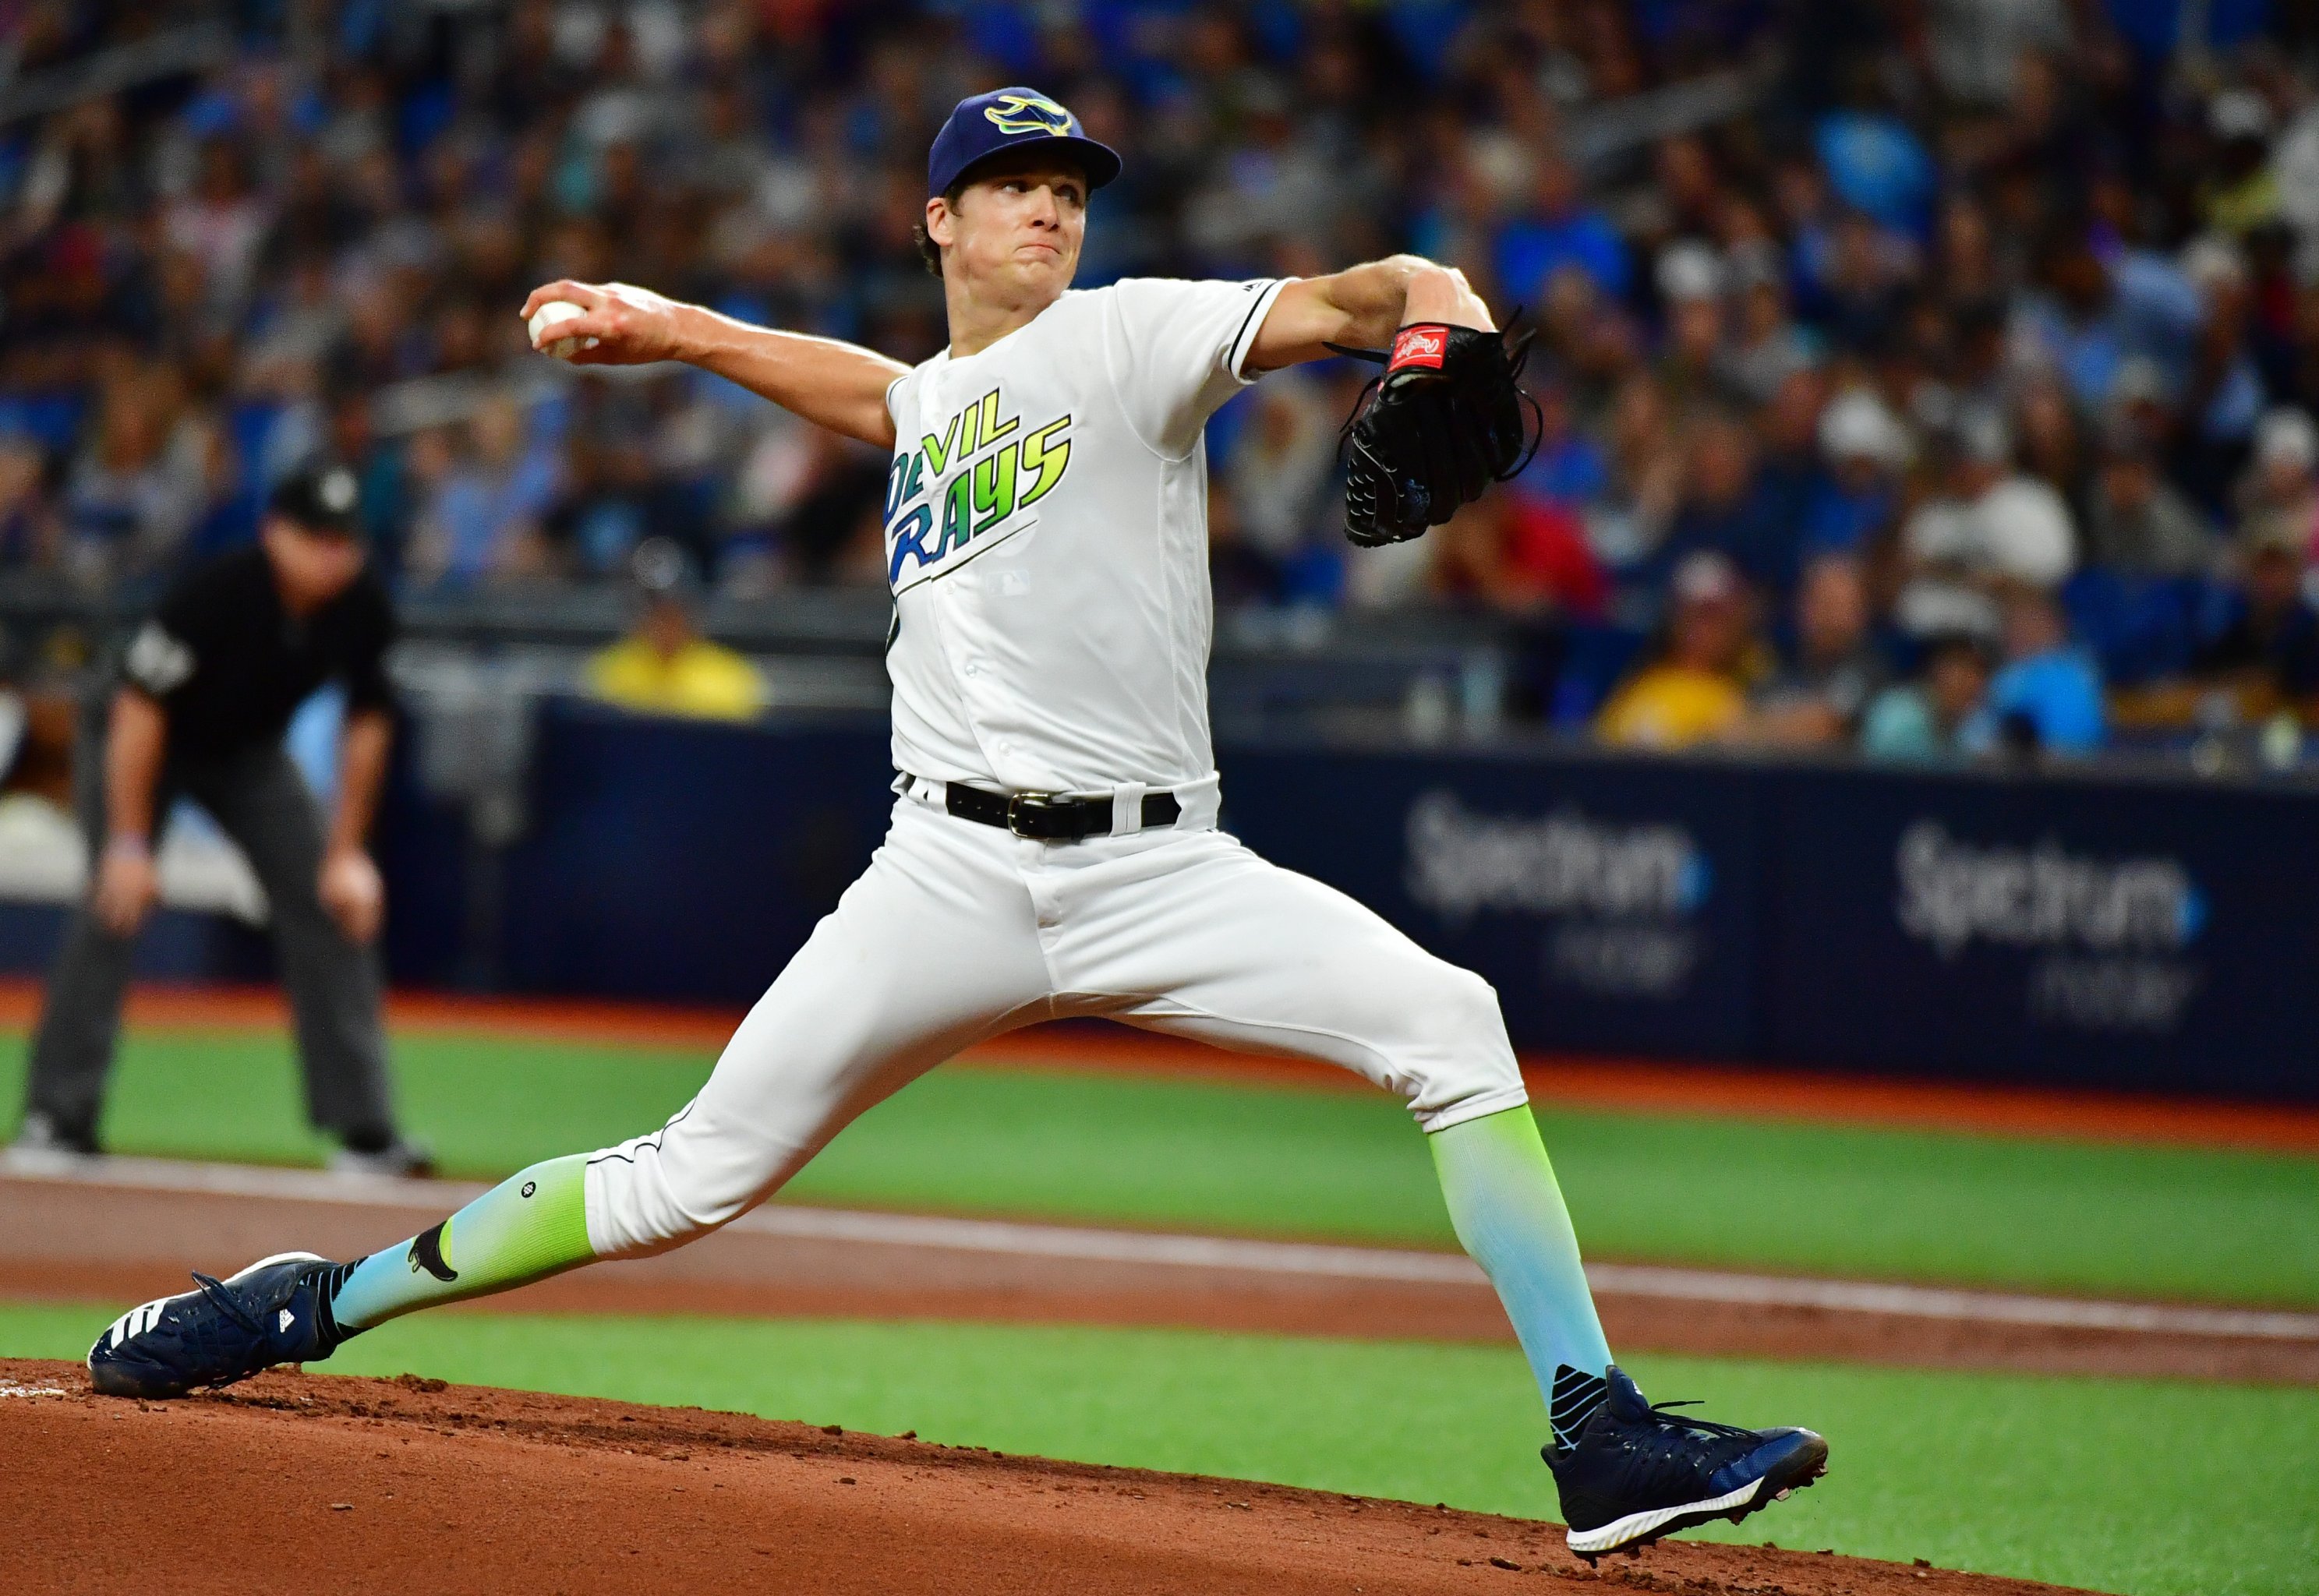 MLB fans freak out over Tampa Bay Rays pitcher Tyler Glasnow's